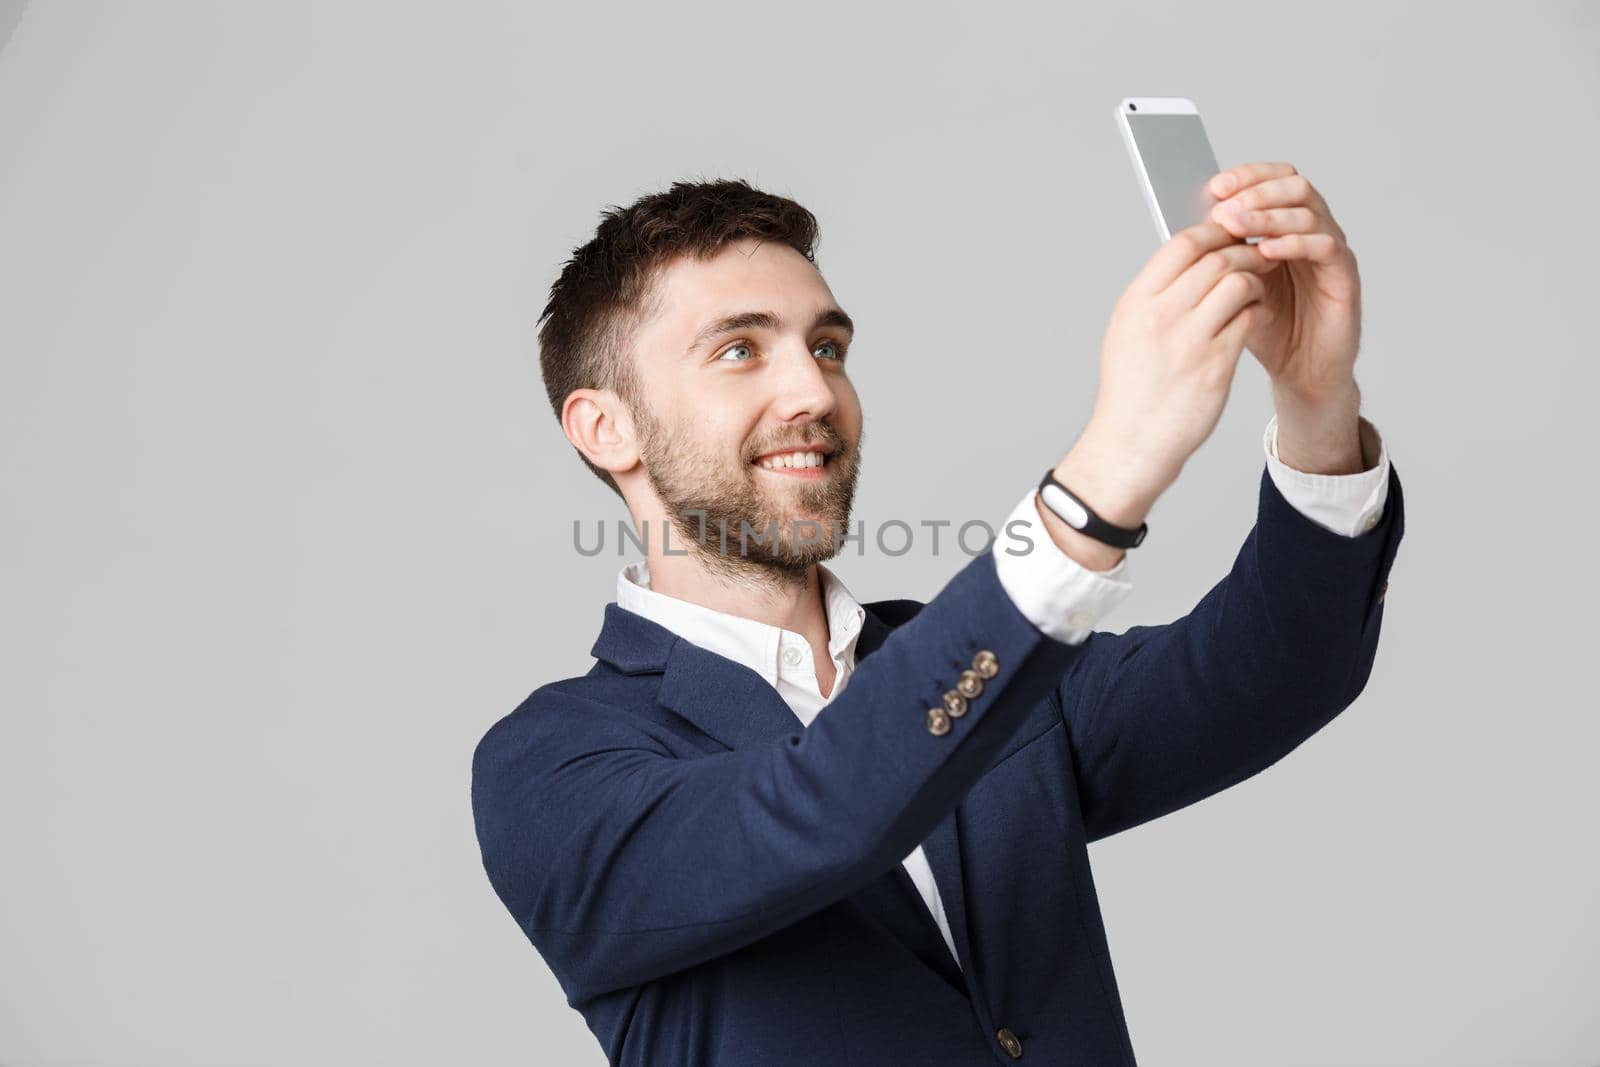 Business Concept - Portrait Handsome Business man take a selfie of himself with smartphone. White Background.